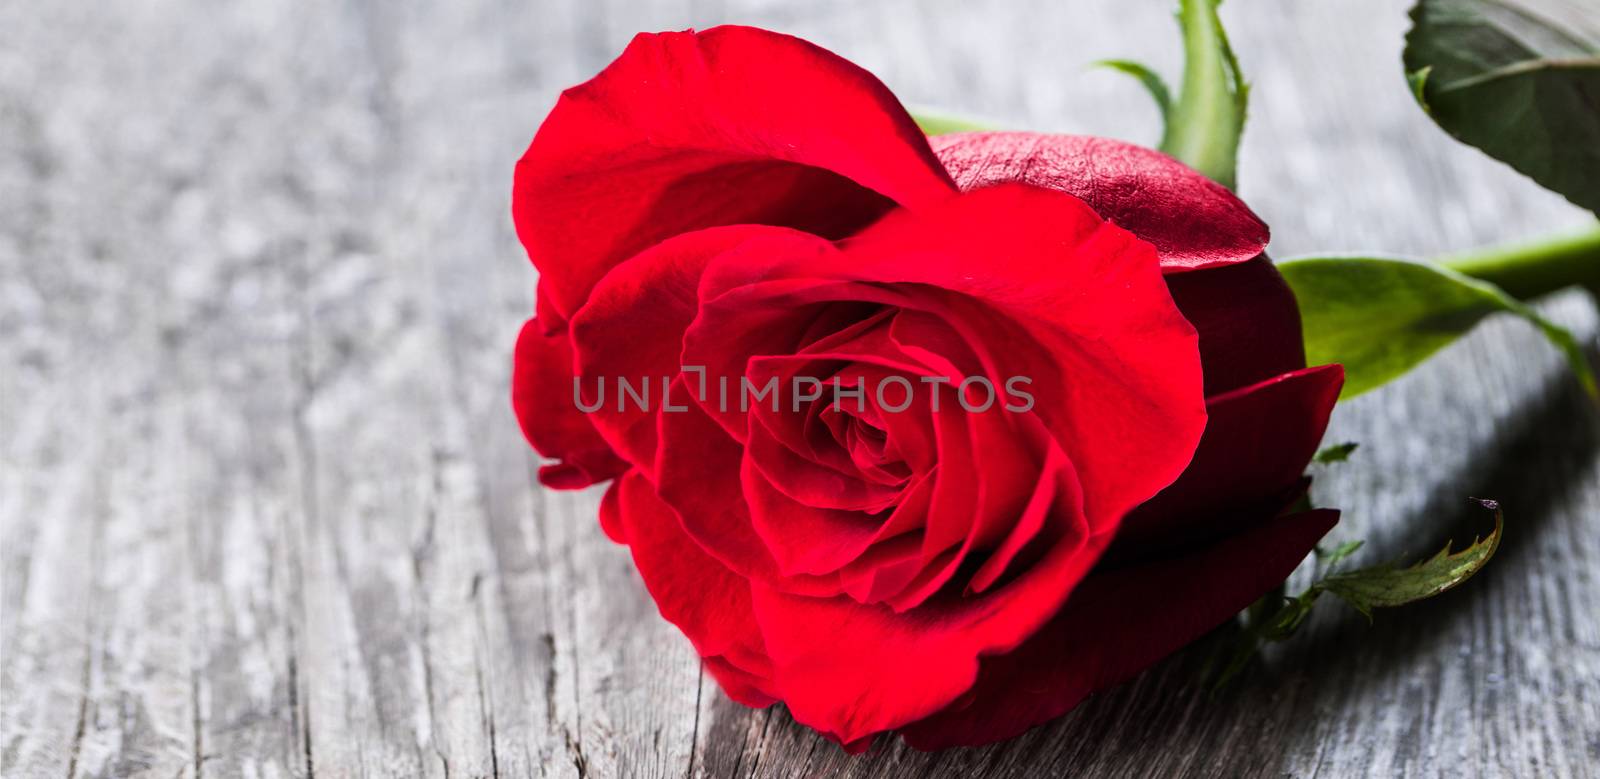 Red rose lying on a wooden table close up